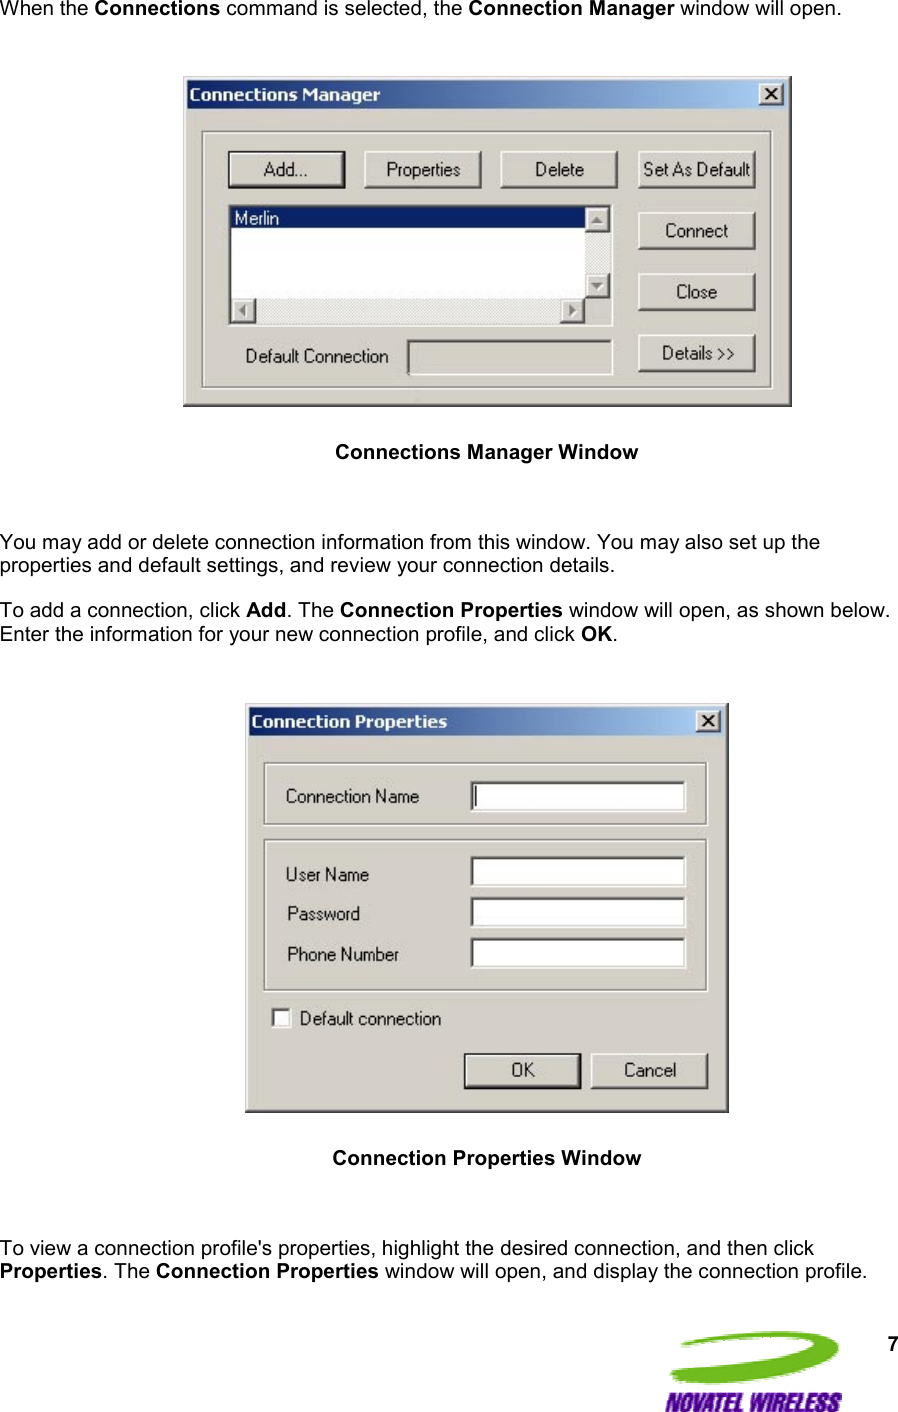  7 When the Connections command is selected, the Connection Manager window will open.    Connections Manager Window  You may add or delete connection information from this window. You may also set up the properties and default settings, and review your connection details. To add a connection, click Add. The Connection Properties window will open, as shown below. Enter the information for your new connection profile, and click OK.    Connection Properties Window  To view a connection profile&apos;s properties, highlight the desired connection, and then click Properties. The Connection Properties window will open, and display the connection profile. 